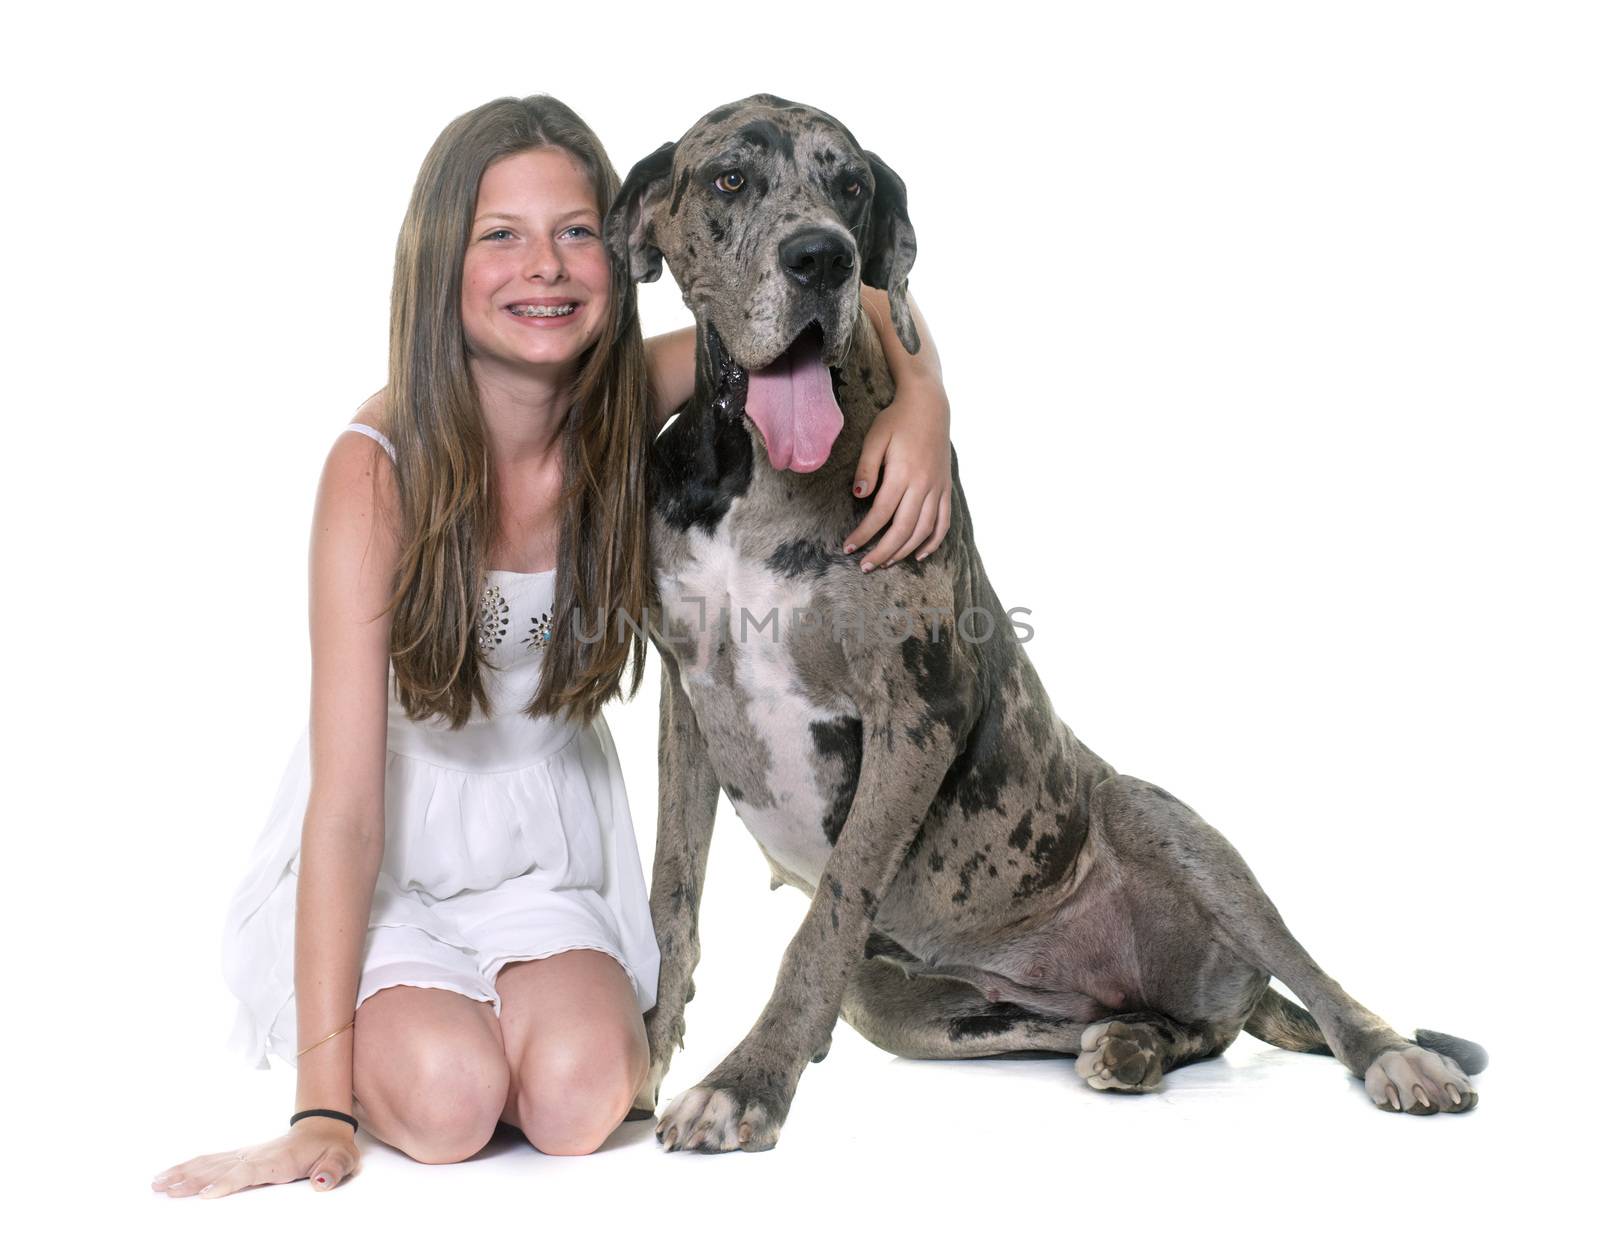 Great Dane and child in front of white background